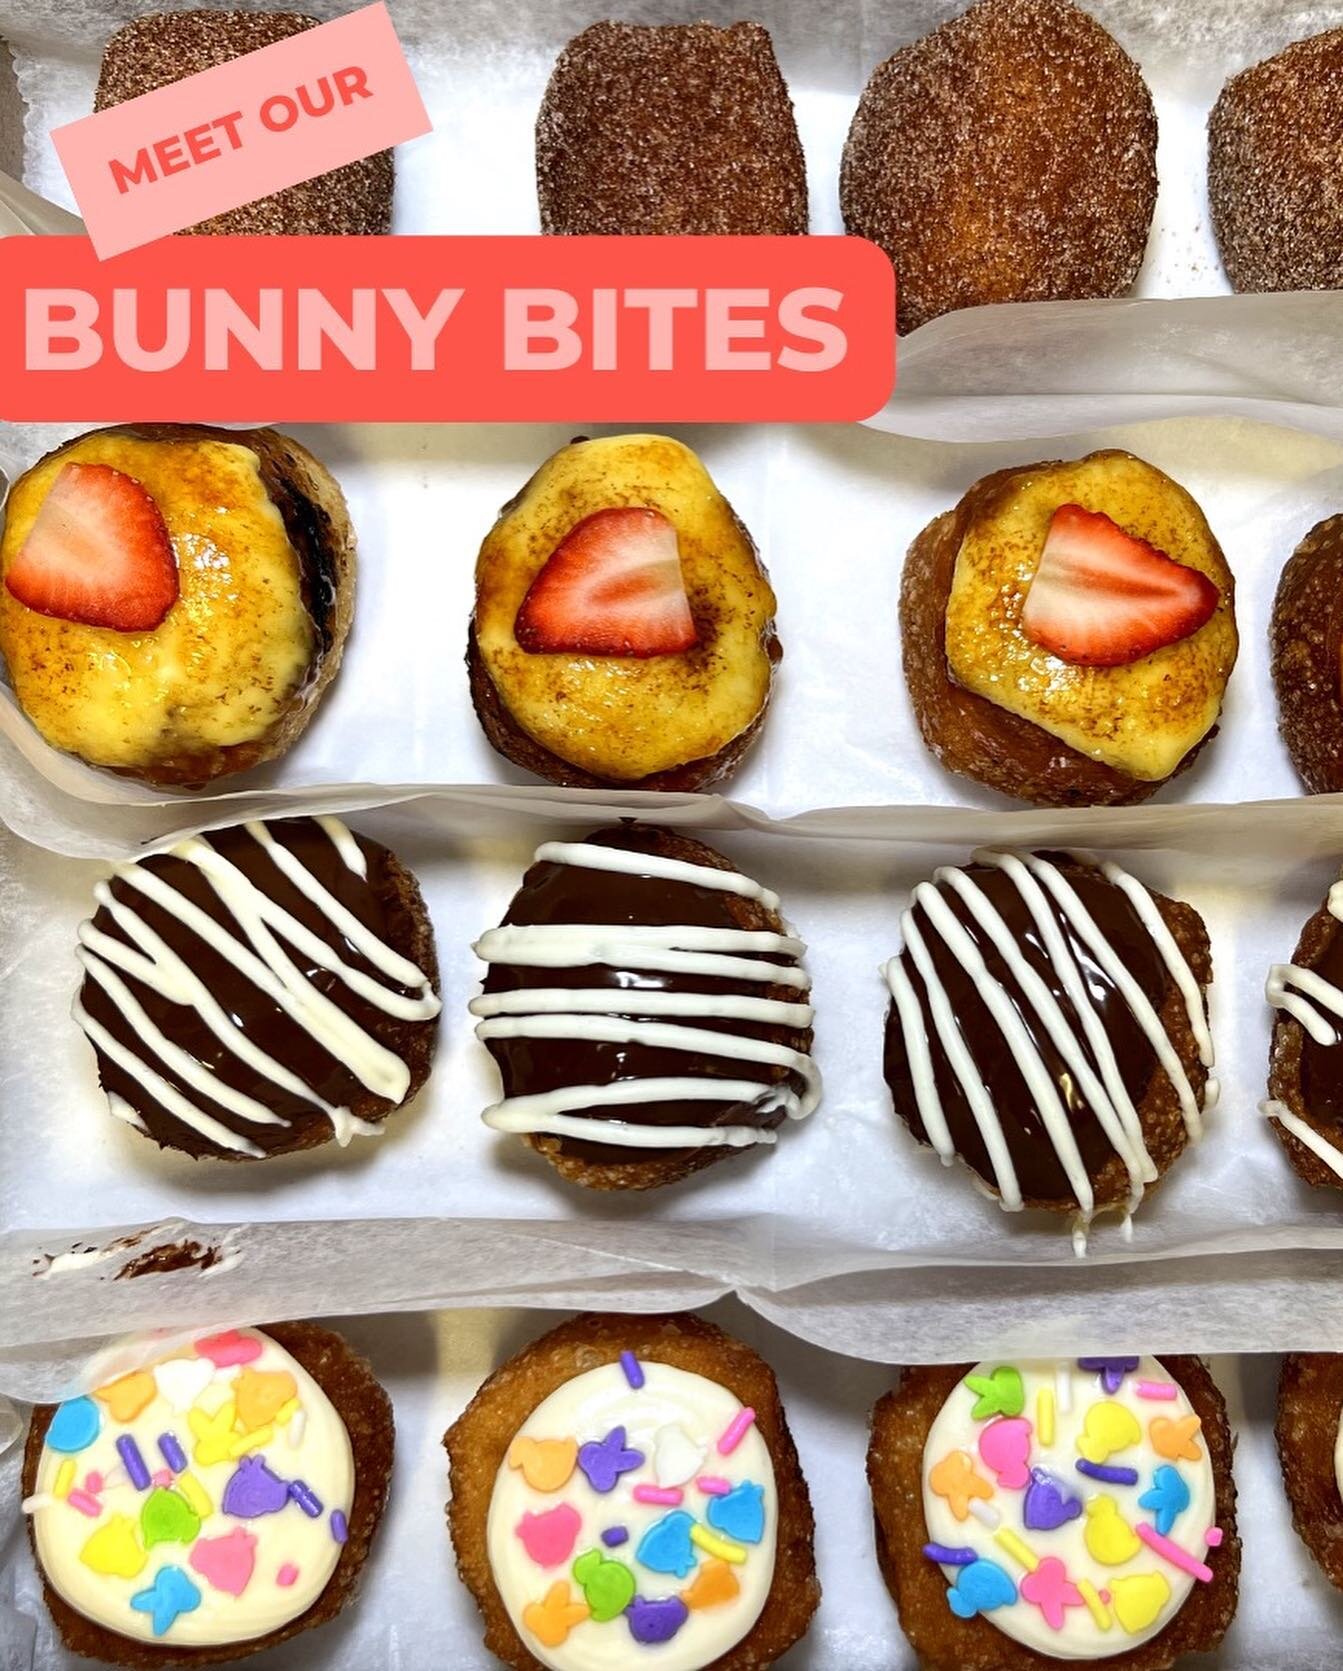 Hop on over to our site 🐰Check out our Limited Edition BUN BITES or DIY with our popular Ready-To-Bake Classics!

Our Easter Preorders are now open for pickup on 4/8 between 10:00 AM - 1:00 PM at our N. Salina St Location. 
*Preorder cut off: 4/5 at